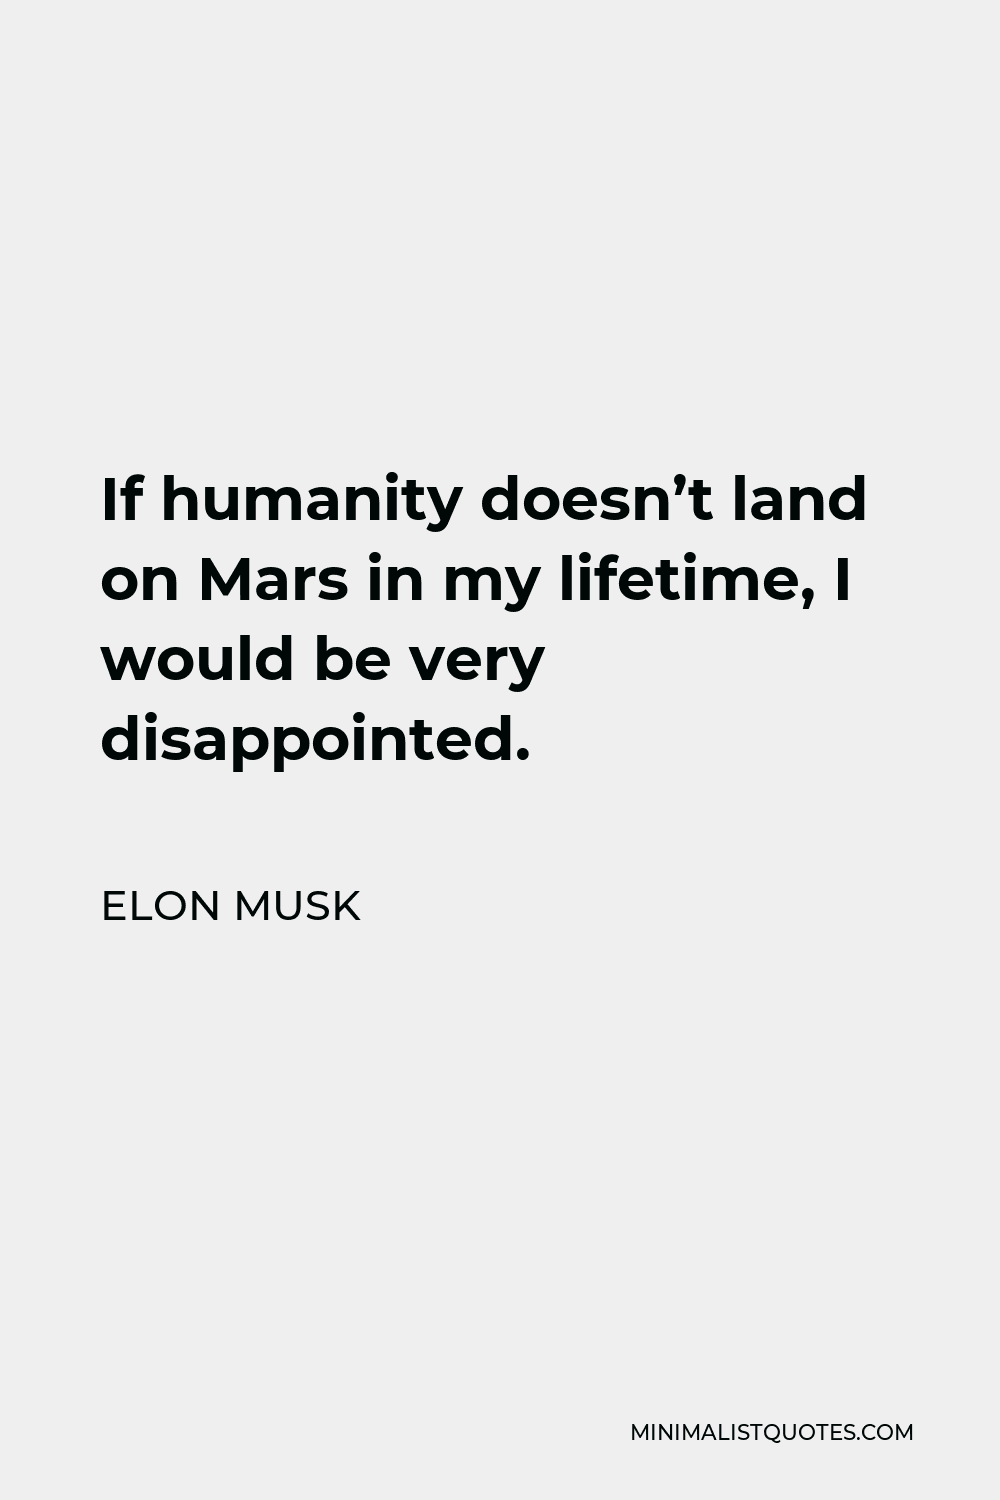 Elon Musk Quote - If humanity doesn’t land on Mars in my lifetime, I would be very disappointed.